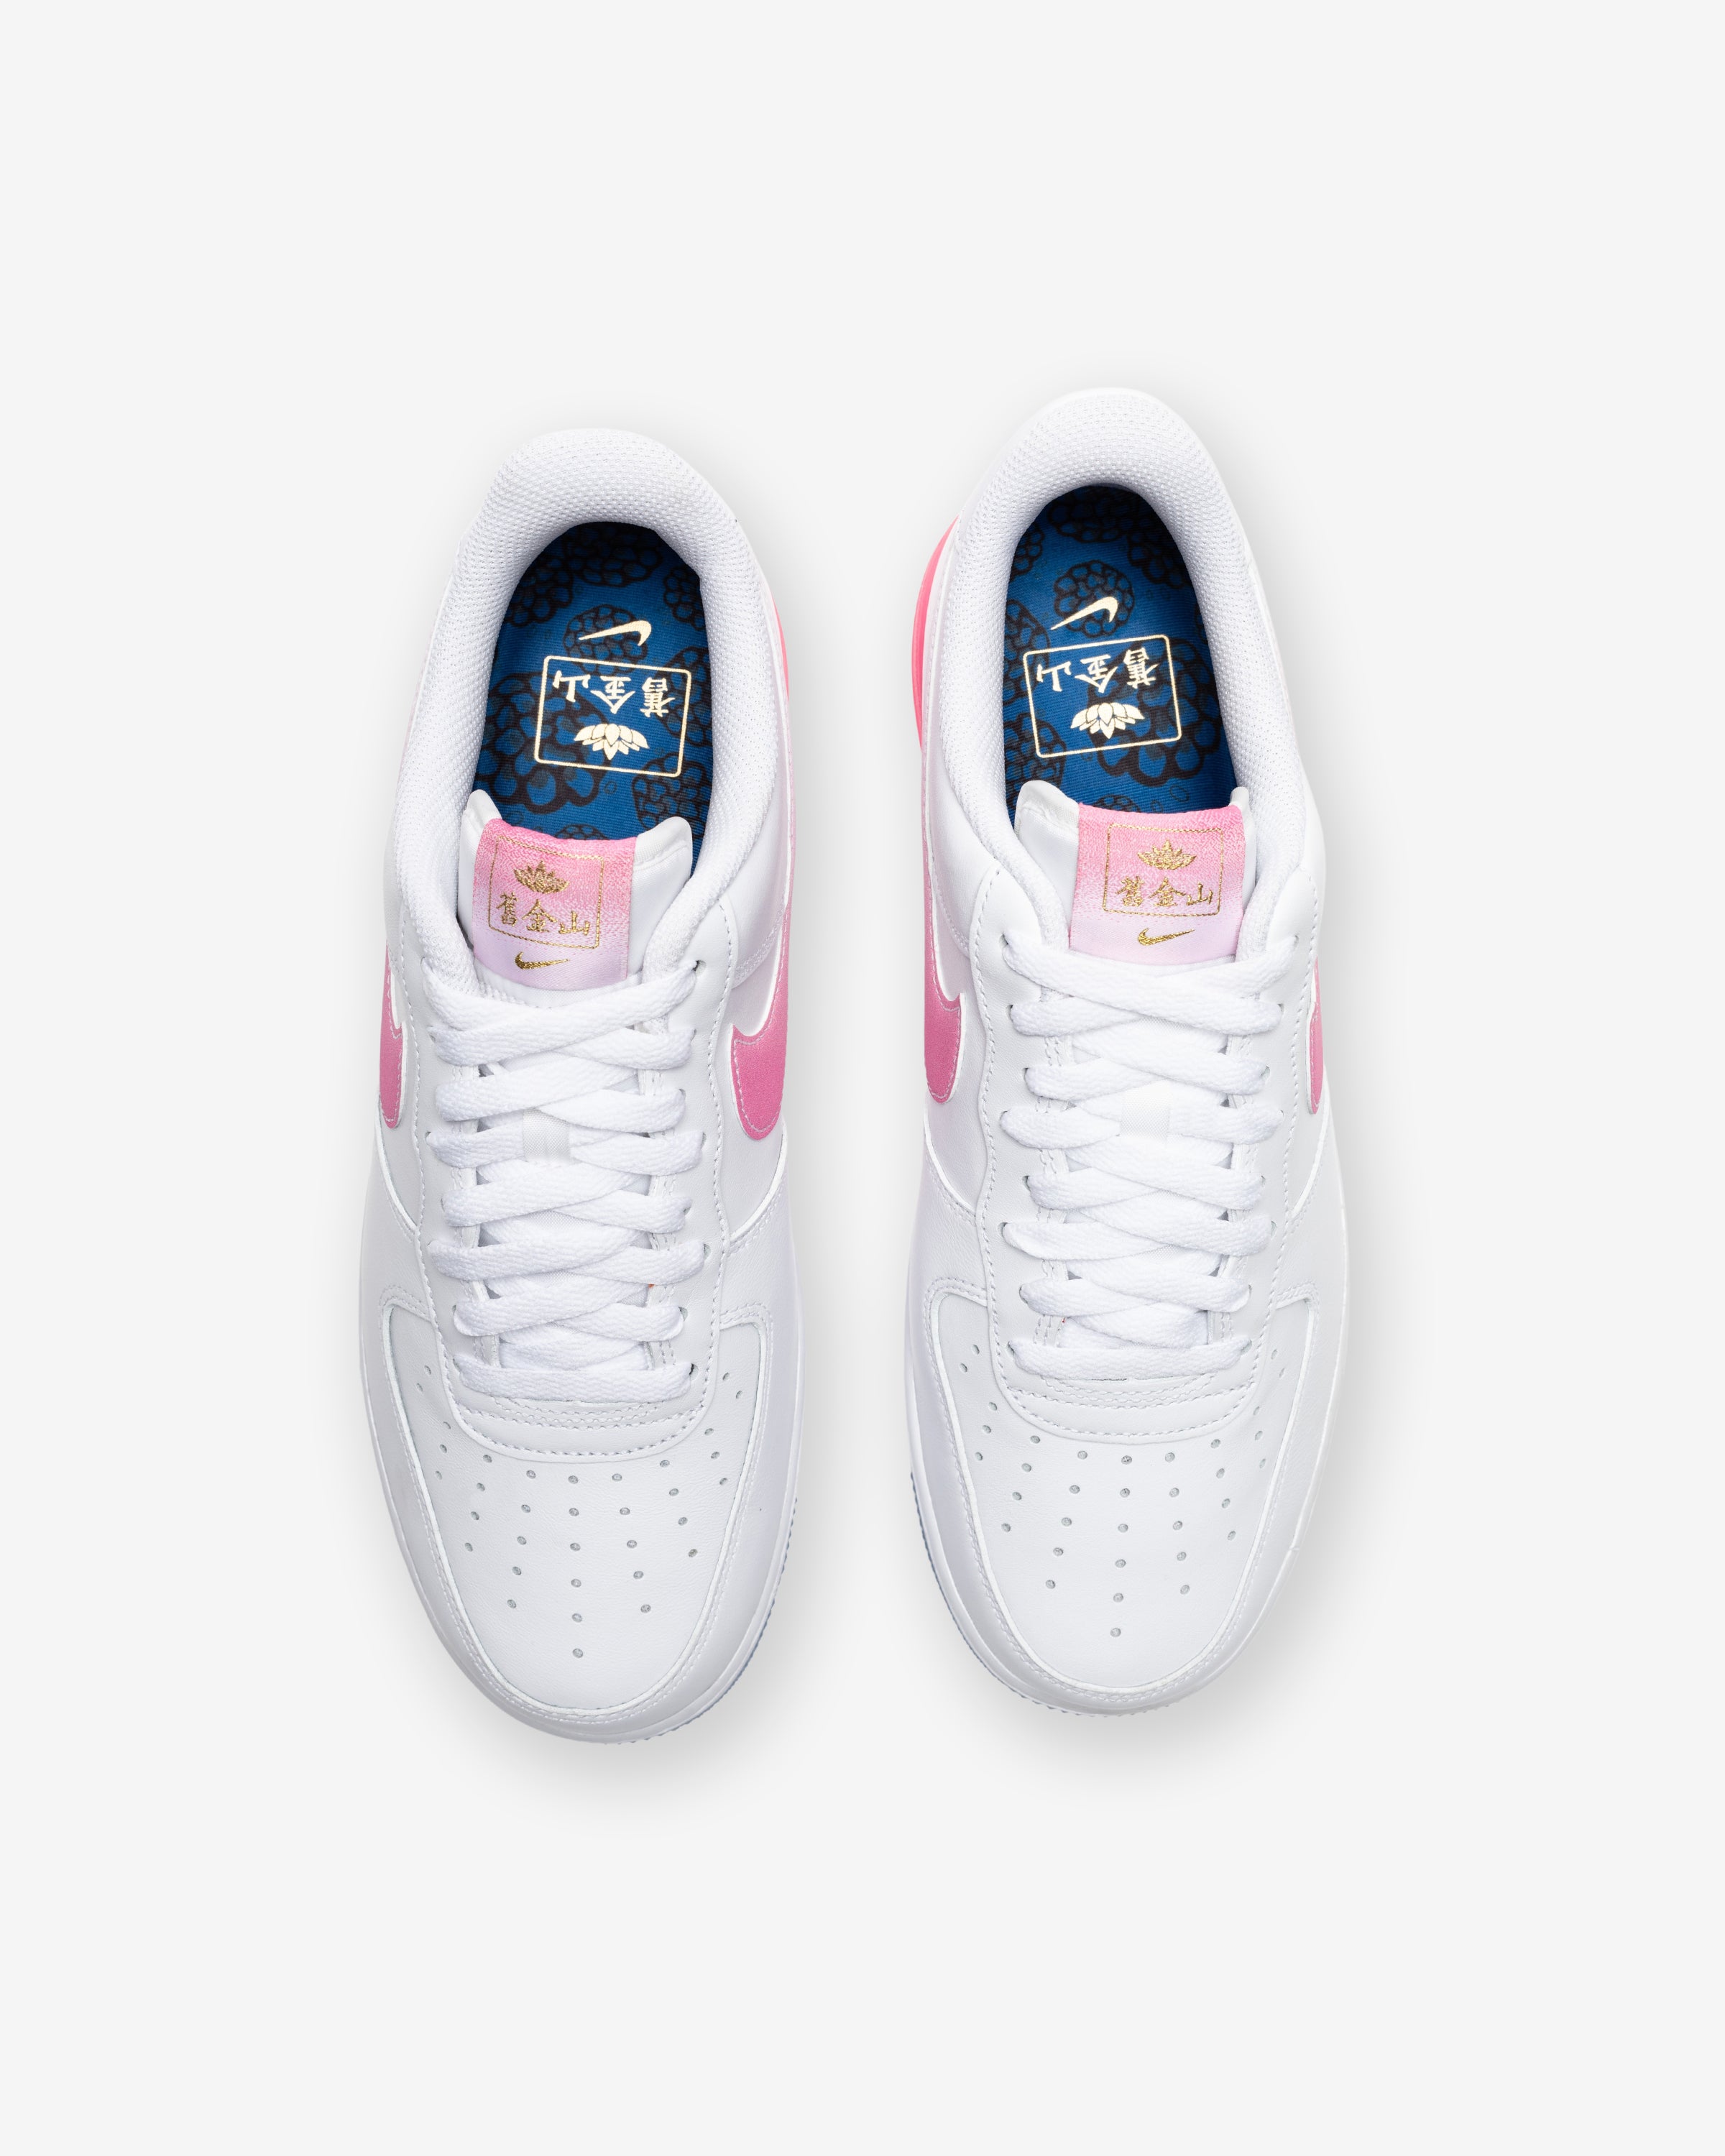 NIKE AIR FORCE 1 '07 PRM - WHITE/ LOTUSPINK/ YELLOWGOLD/ BLUEJAY